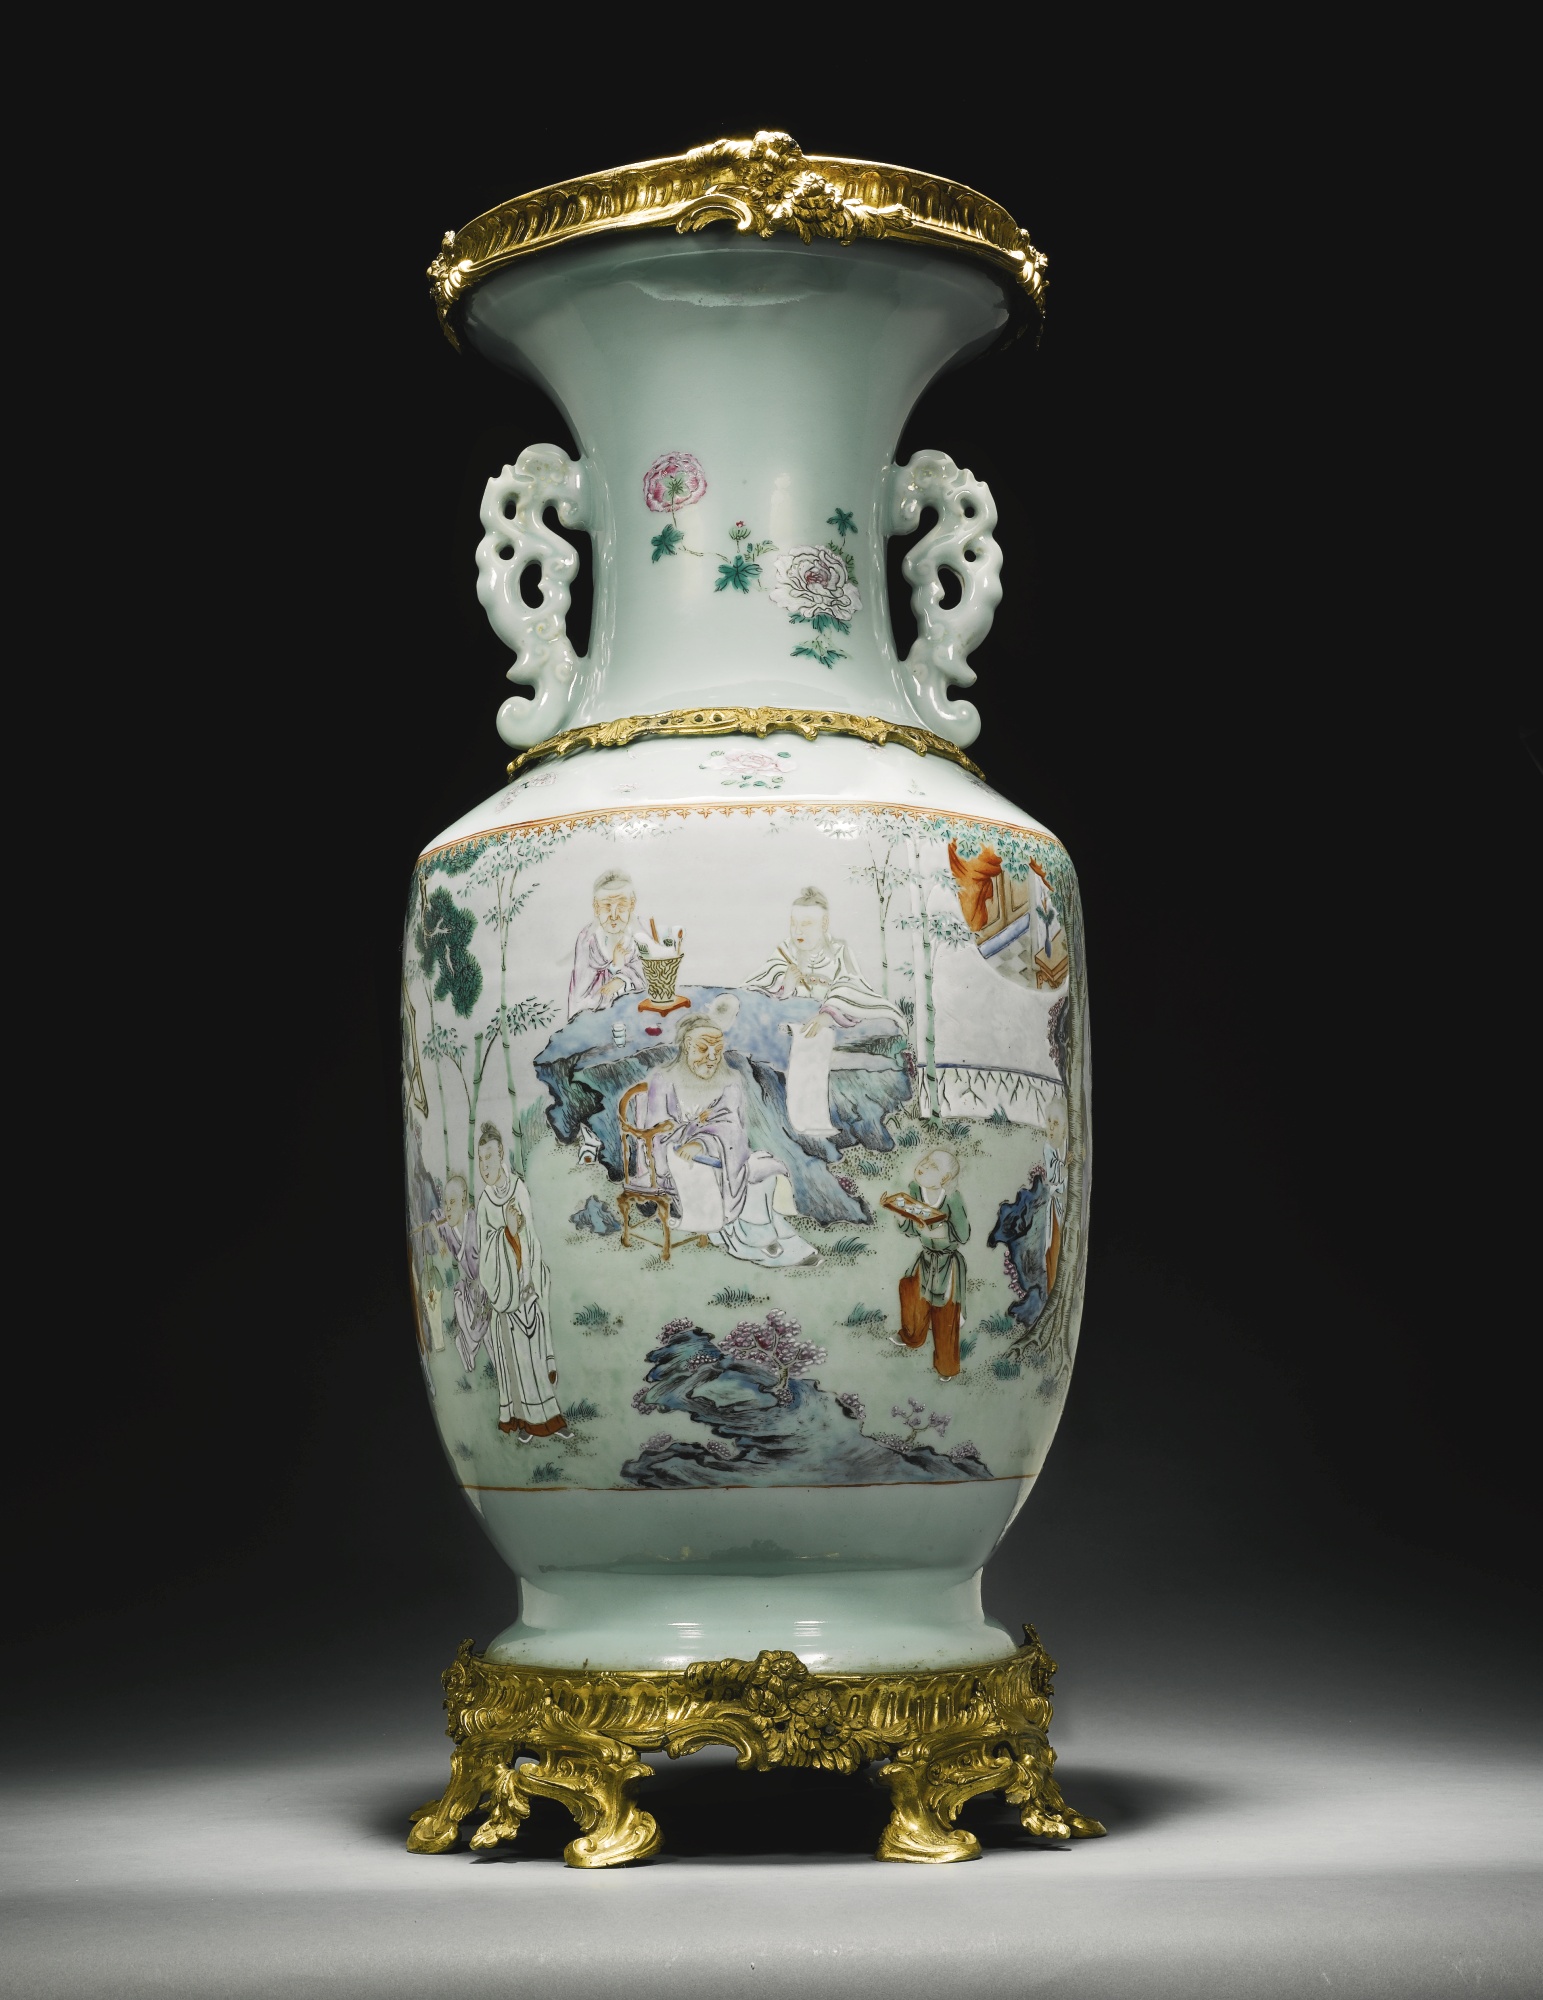 Chinese porcelain vase  qing dynasty  mid 18th century